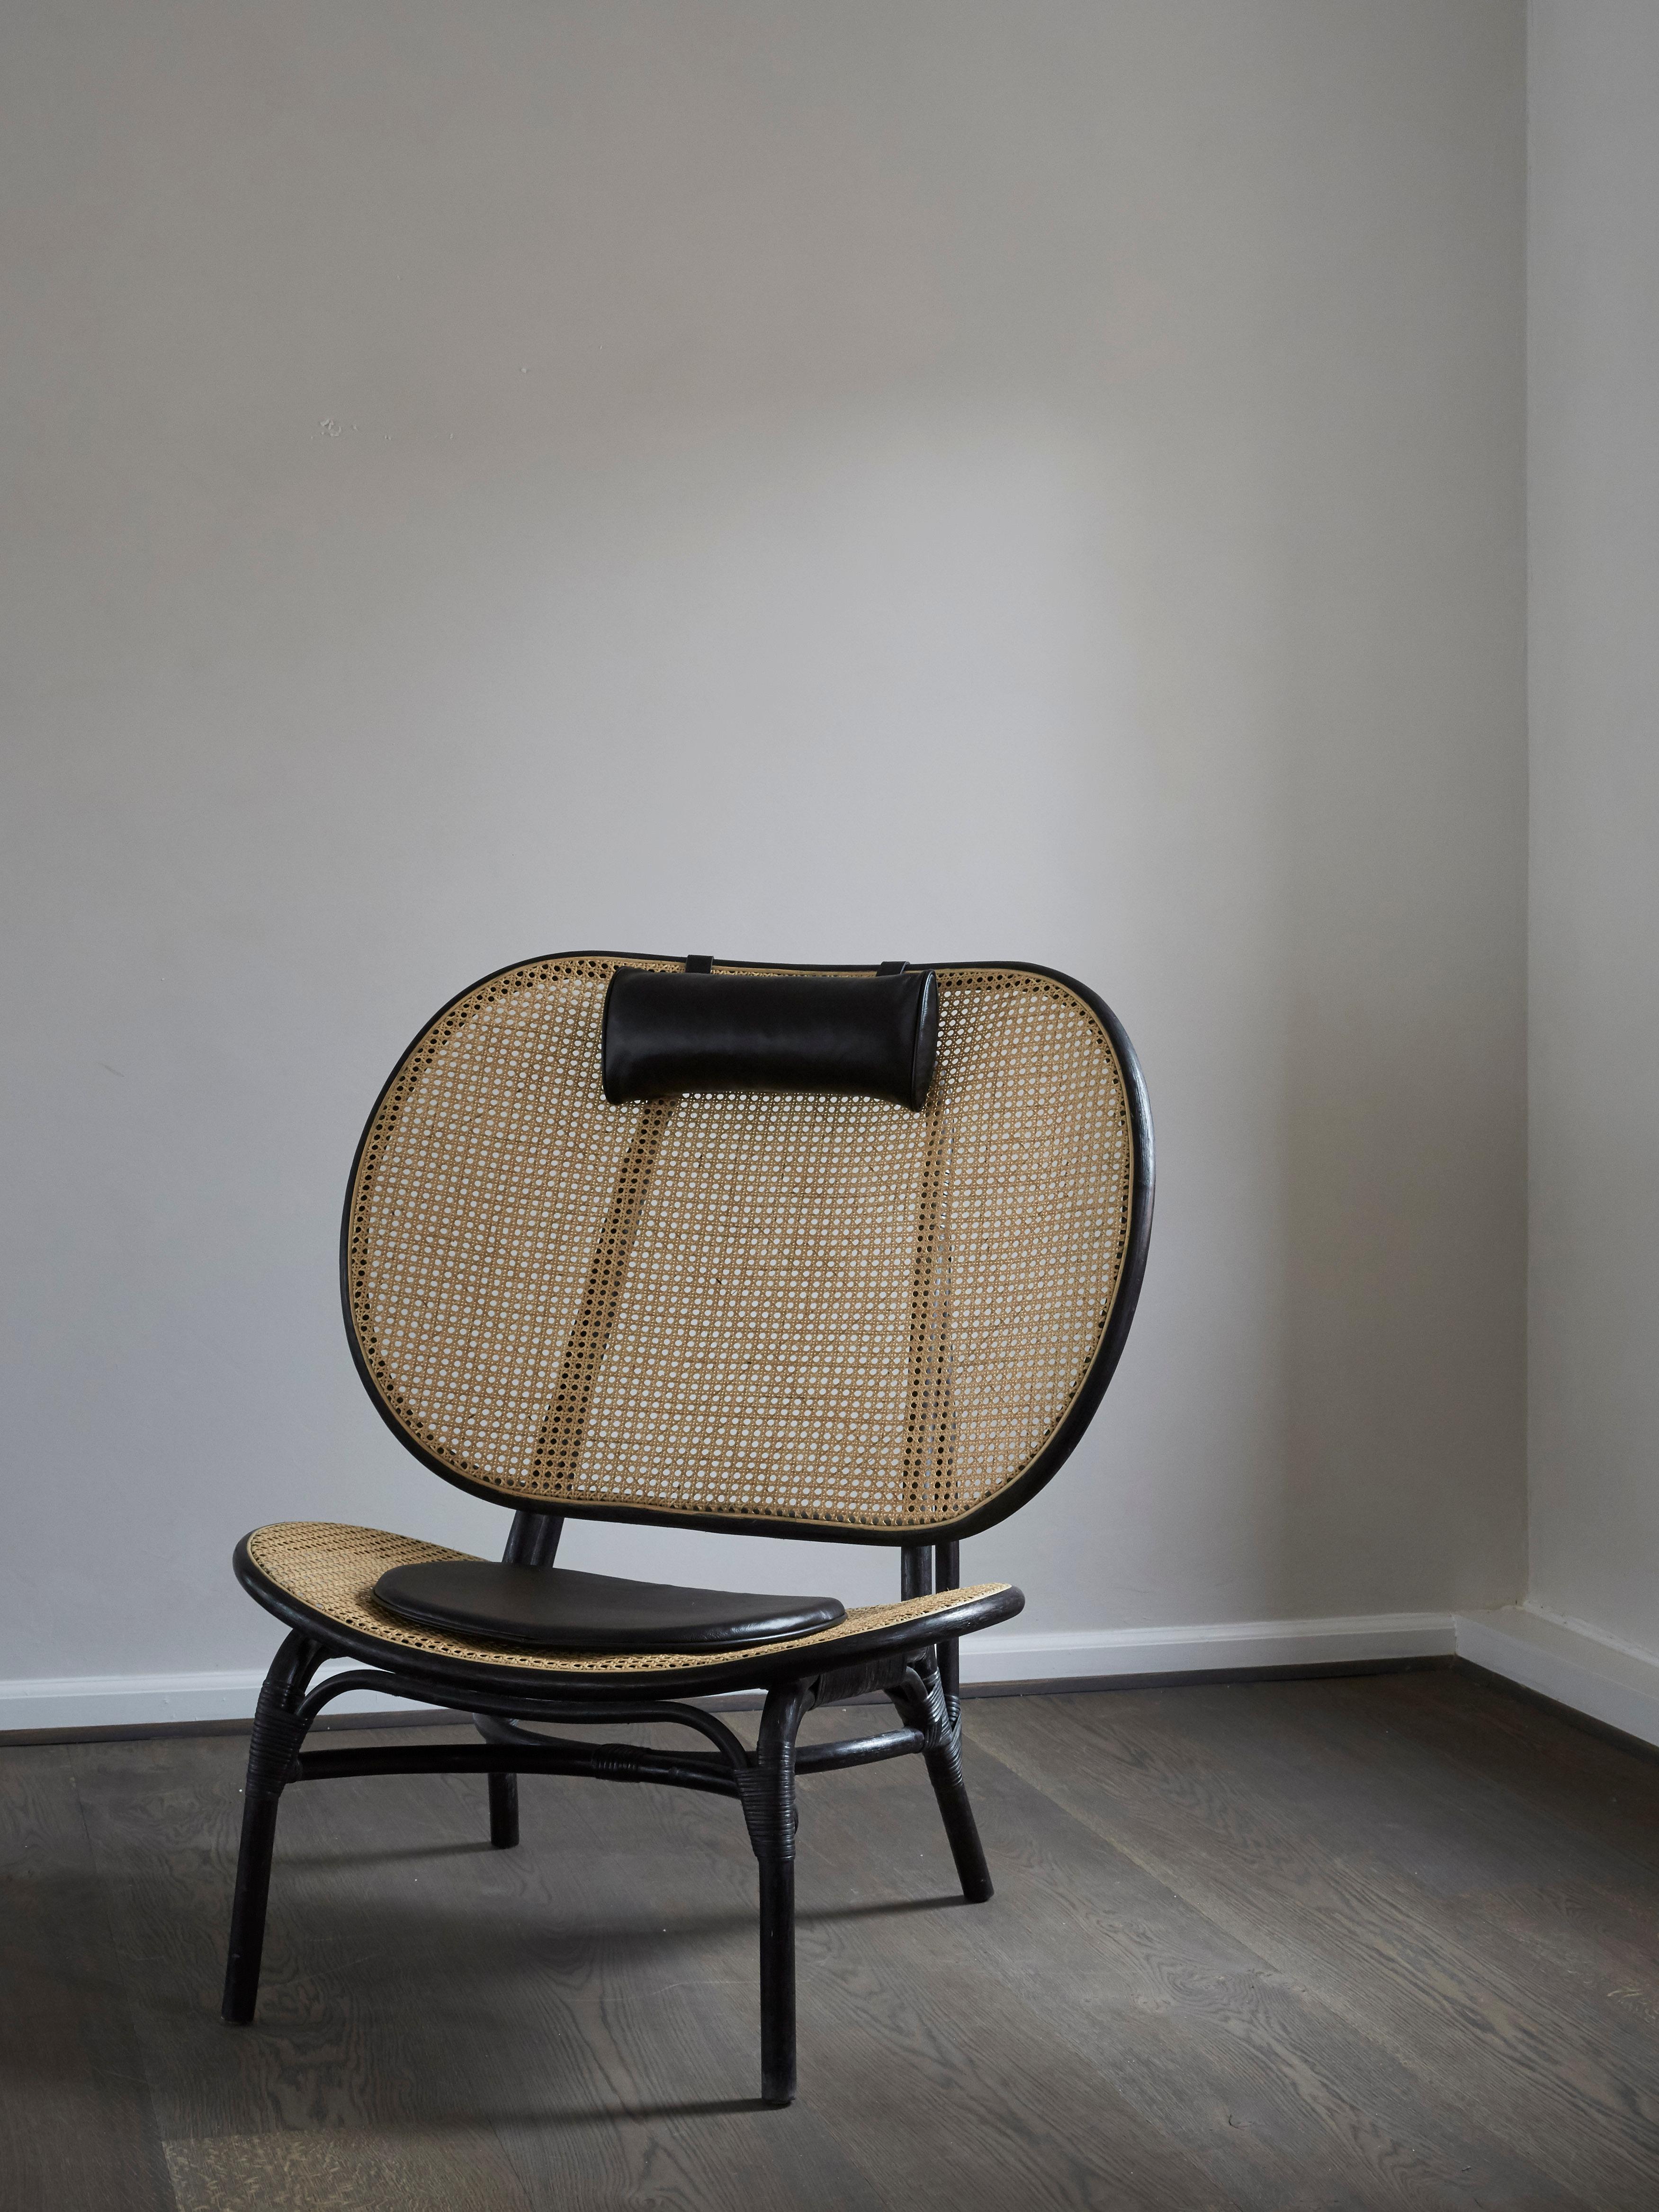 Nomad Black Frame Low Chair by NORR11
Dimensions: D 77 x W 100 x H 110 cm. SH 39 cm.
Materials: Bamboo, inlaid natural French rattan, foam and aniline leather.

Seat and back are made of two large molded bamboo frames, with inlaid natural French